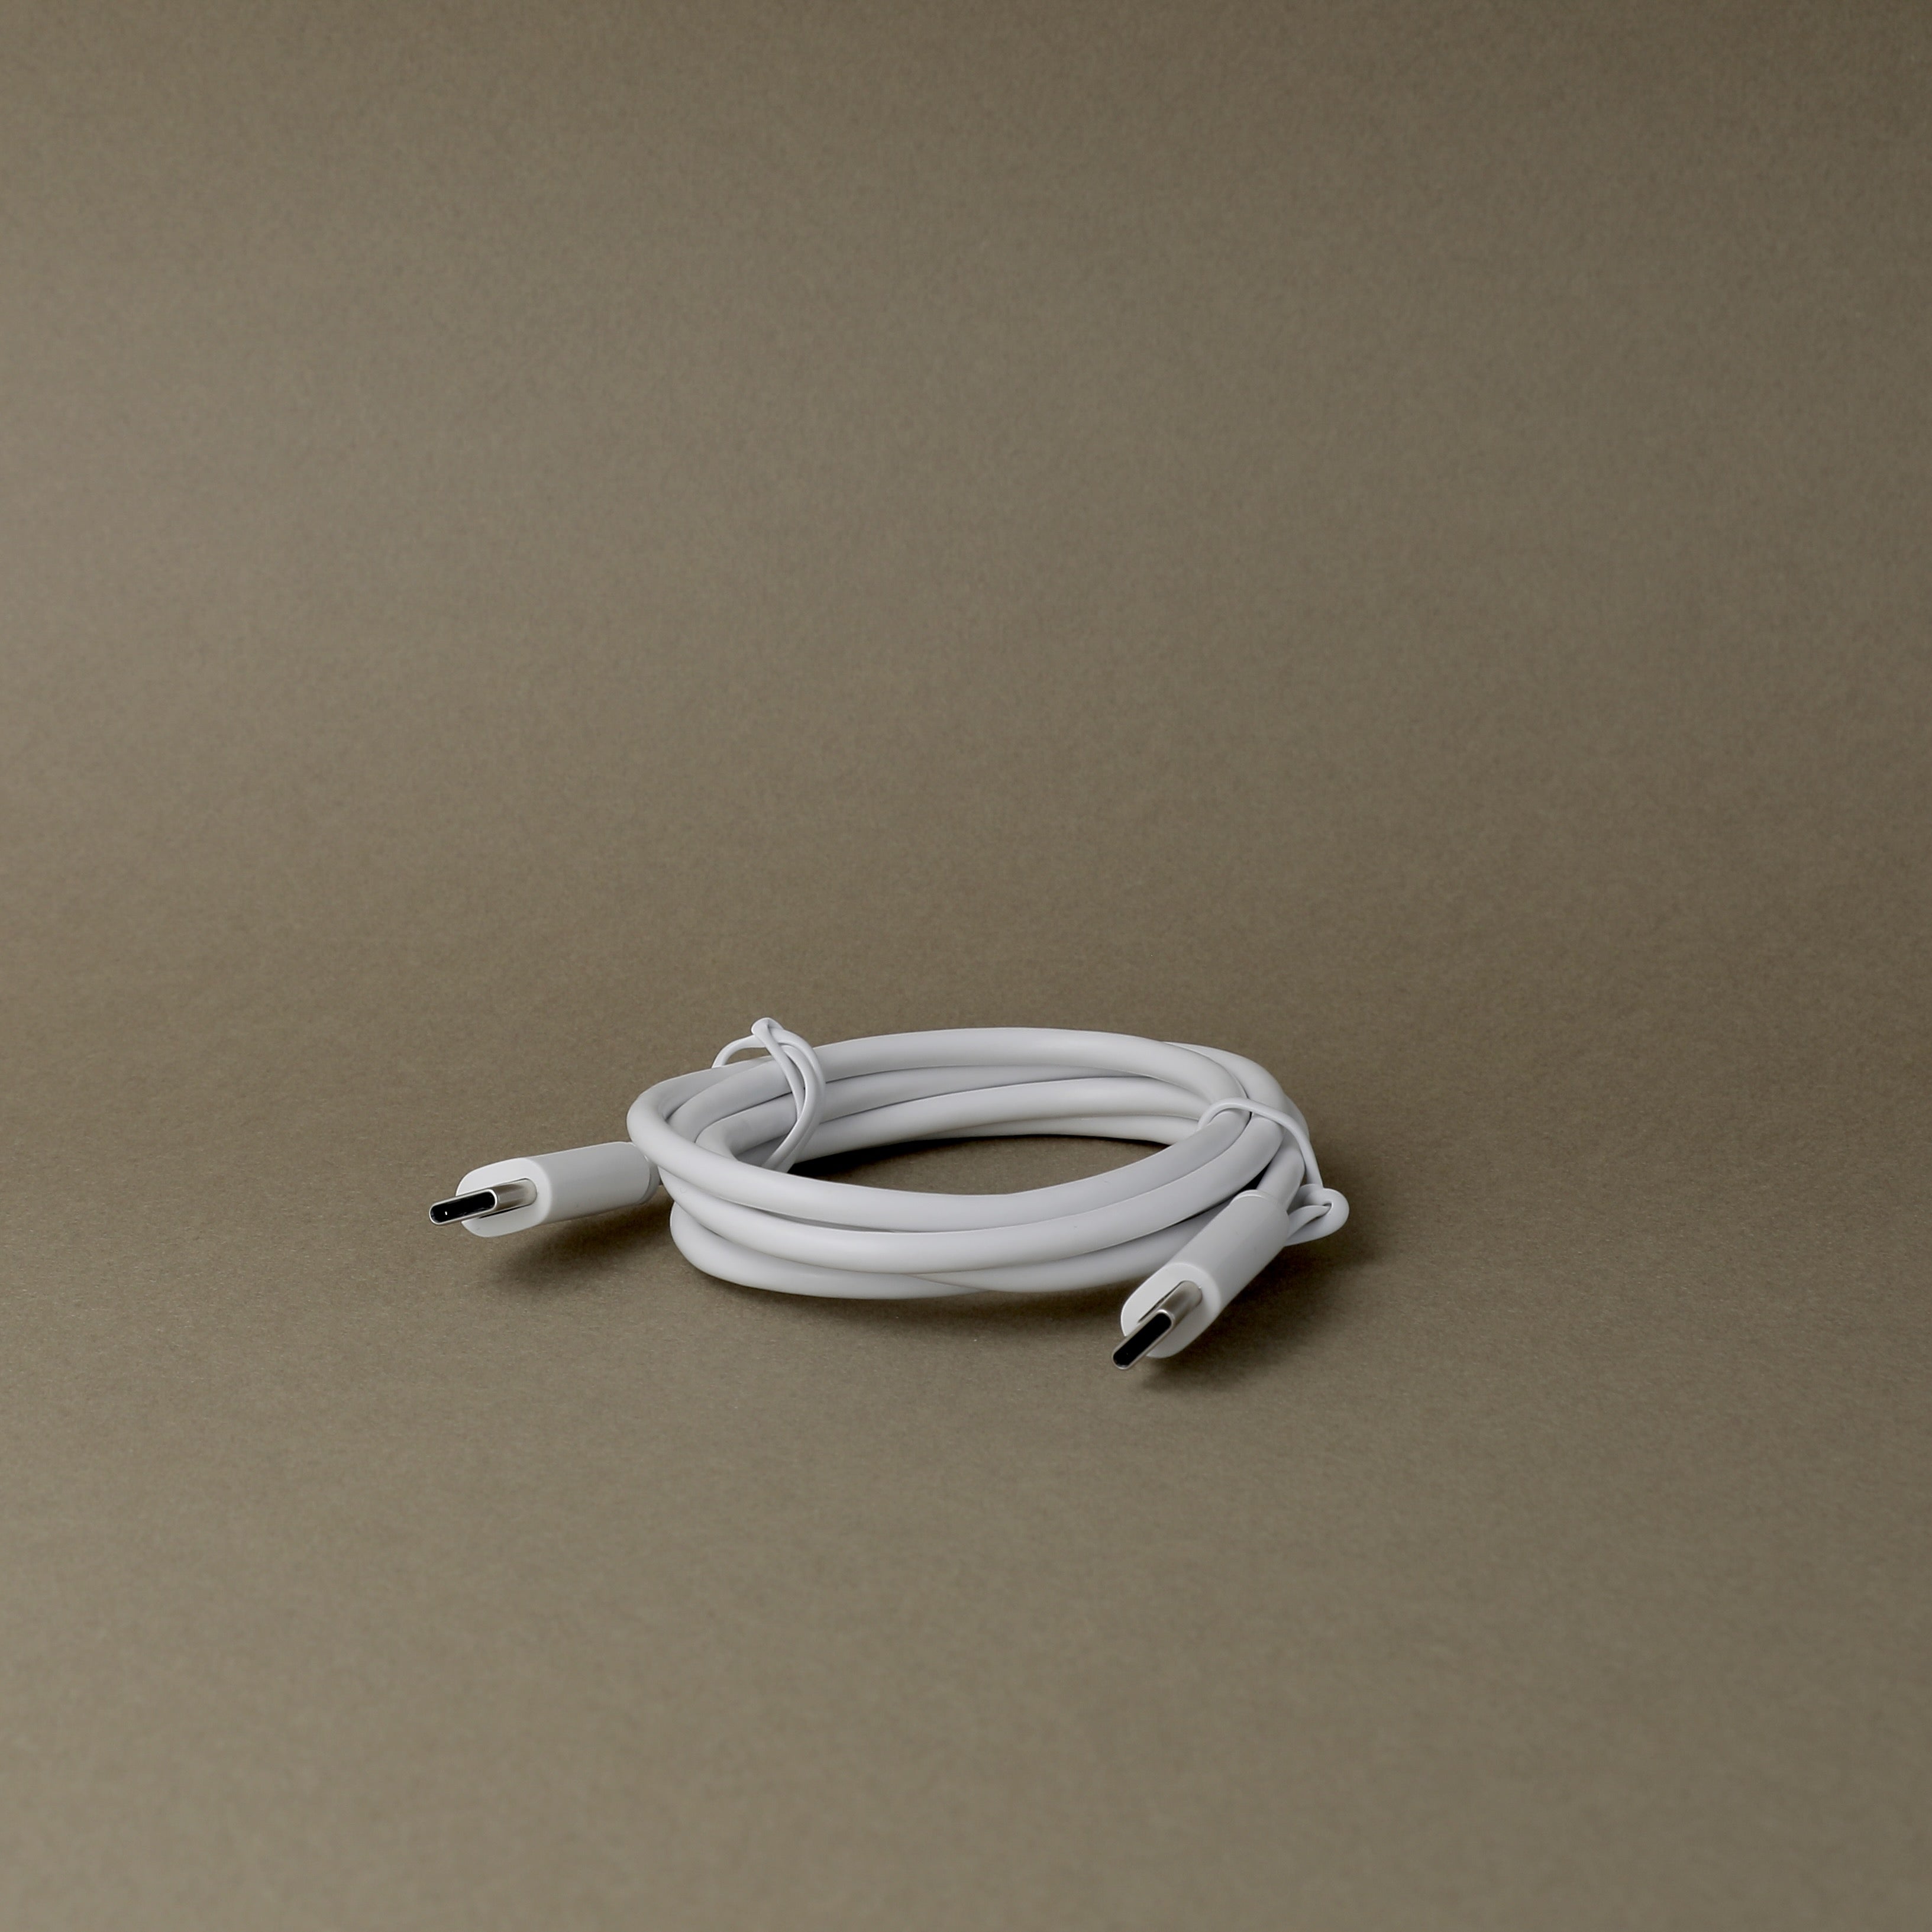 Tula USB-C to USB-C cable, 3ft